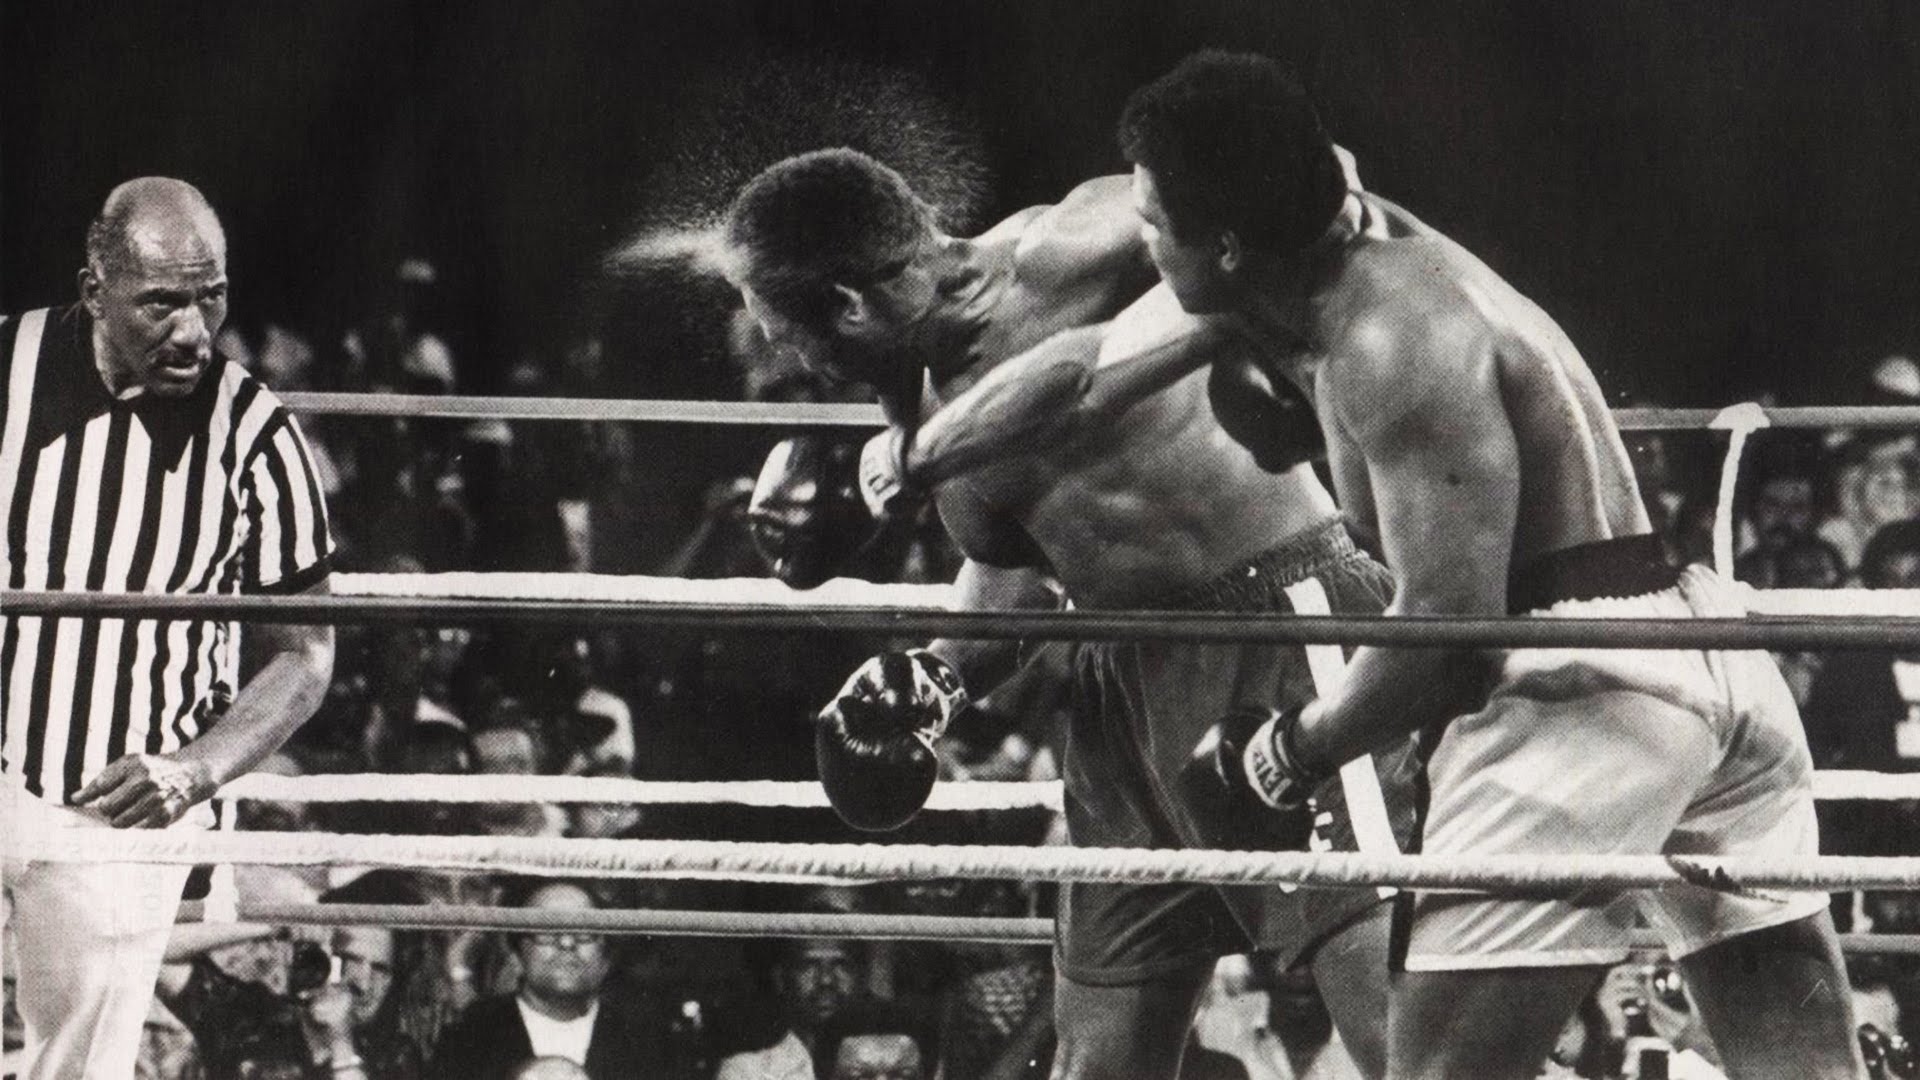 Ali lands a quick right lead on George Foreman in the Rumble in the Jungle 